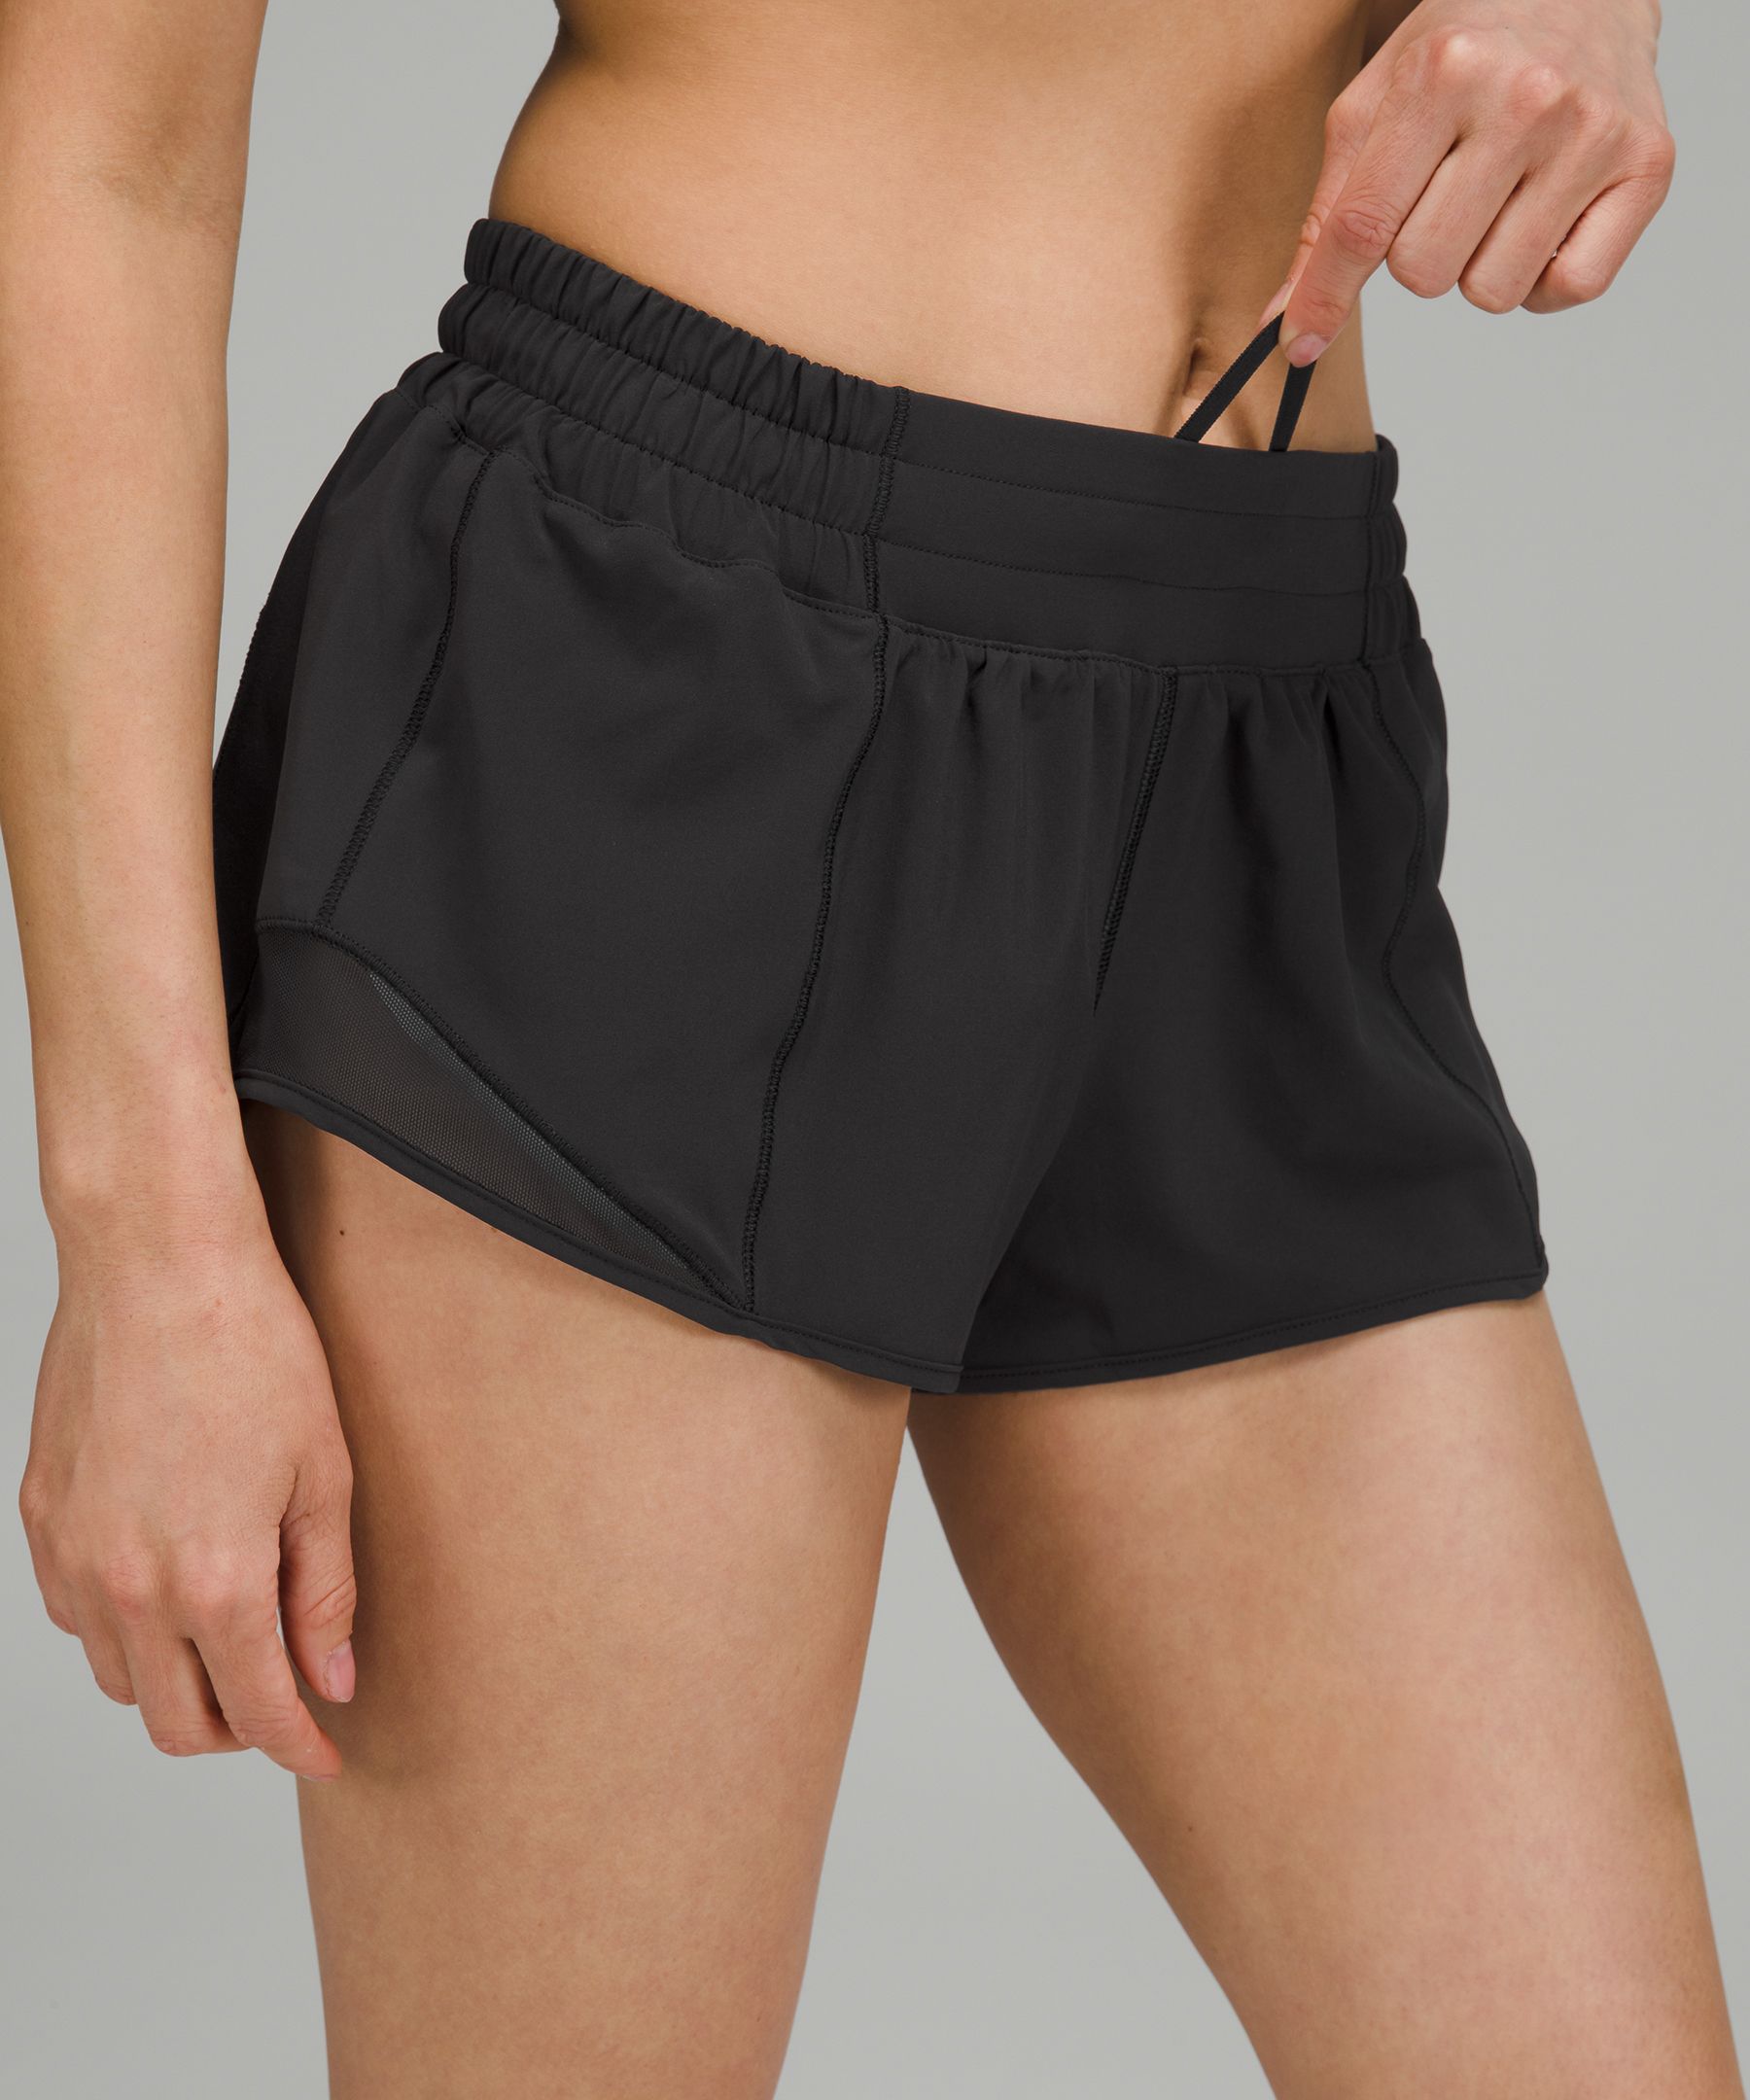 Hotty hot LR short 2.5 *lined size 10 color sncp swiftly tech